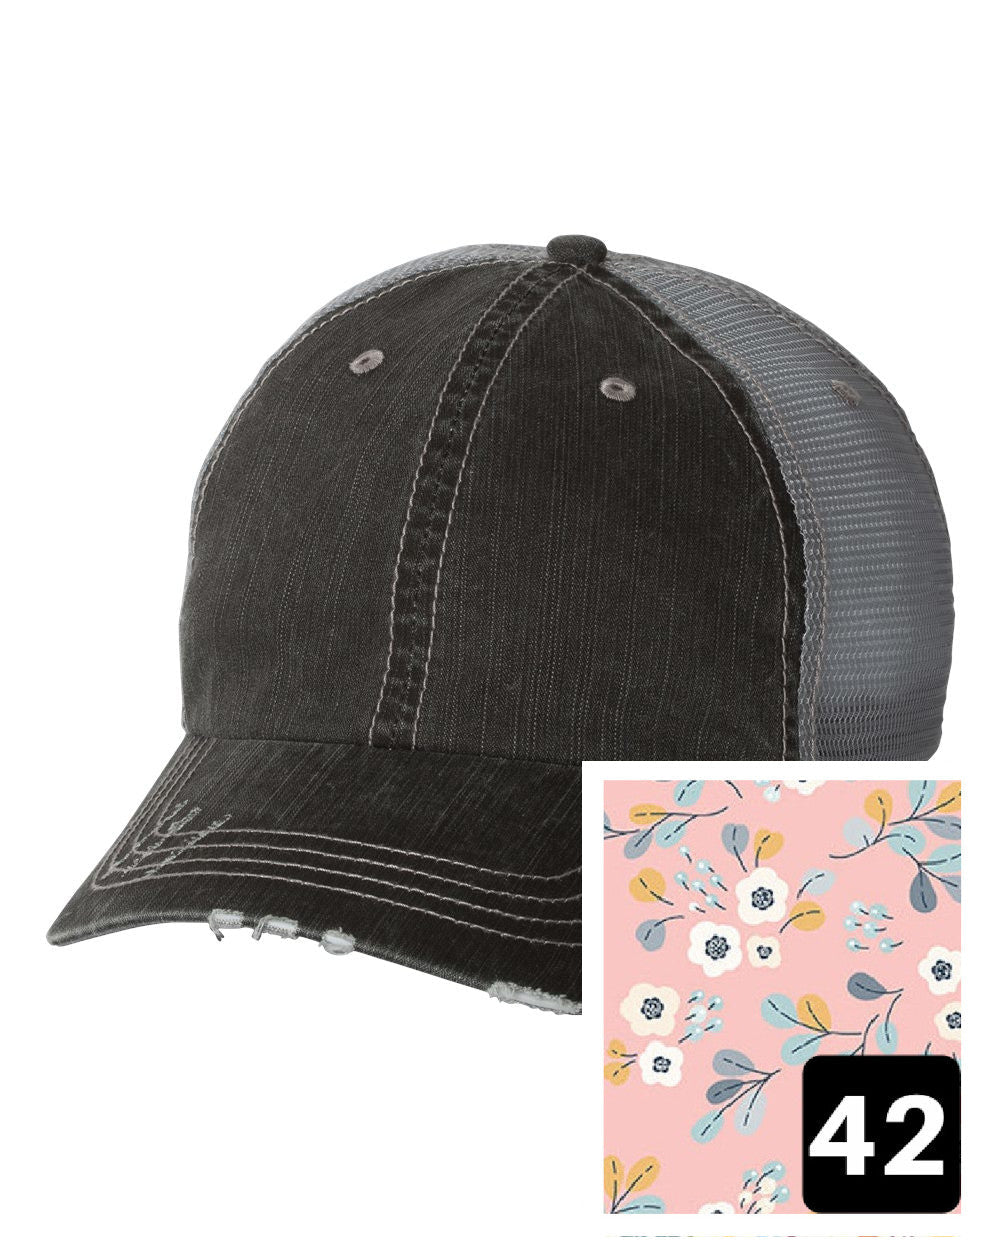 gray distressed trucker hat with light blue and pink mosaic fabric state of Nevada